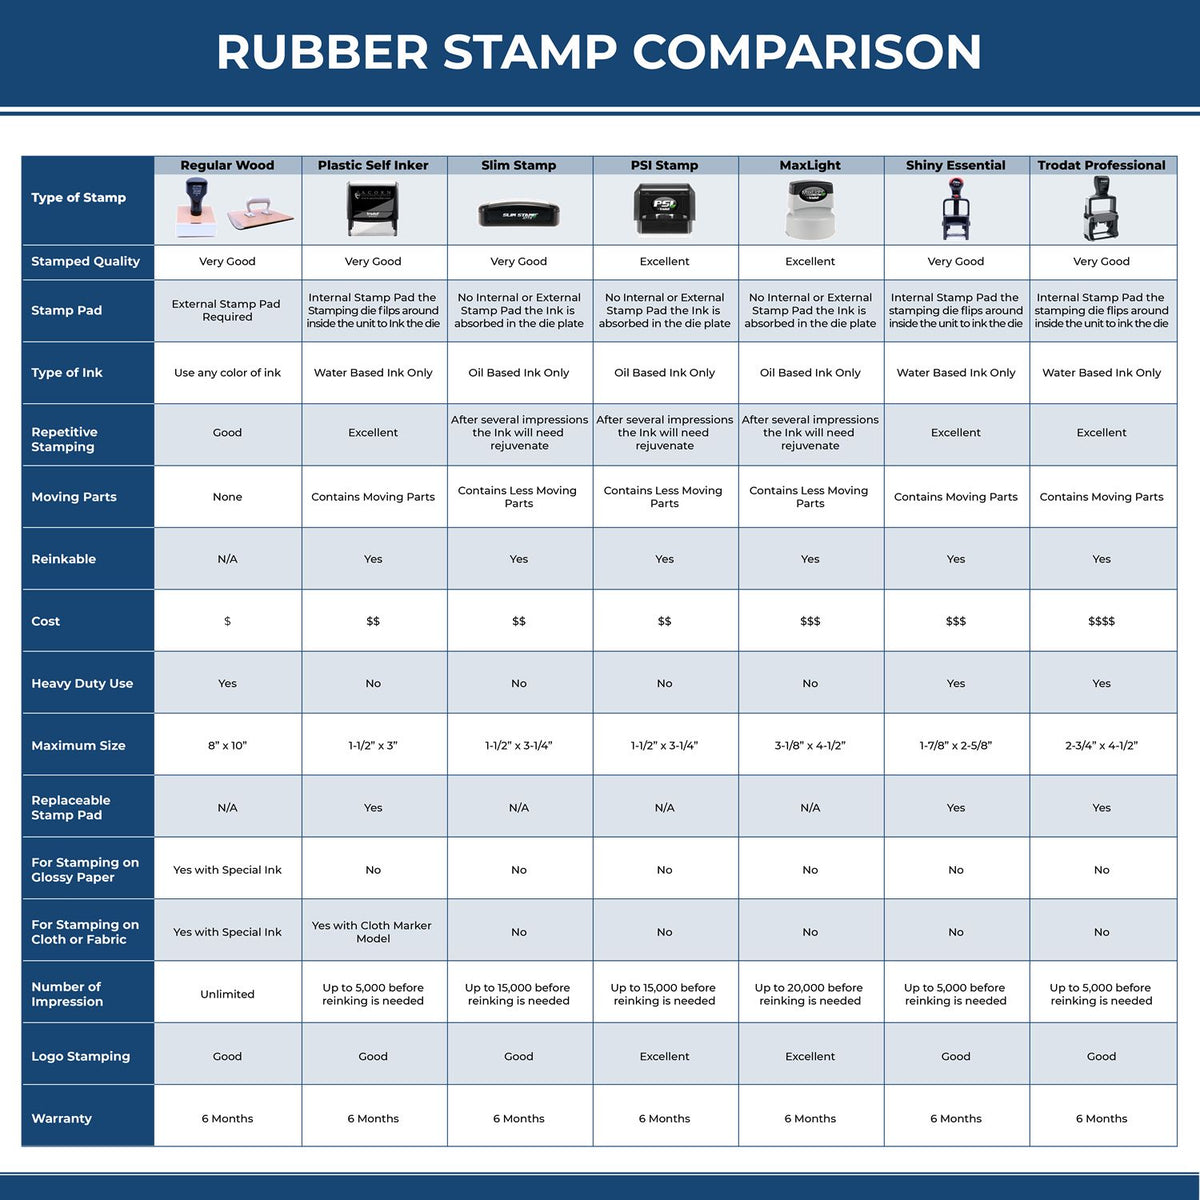 A comparison chart for the different types of mount models available for the PSI New Mexico Notary Stamp.